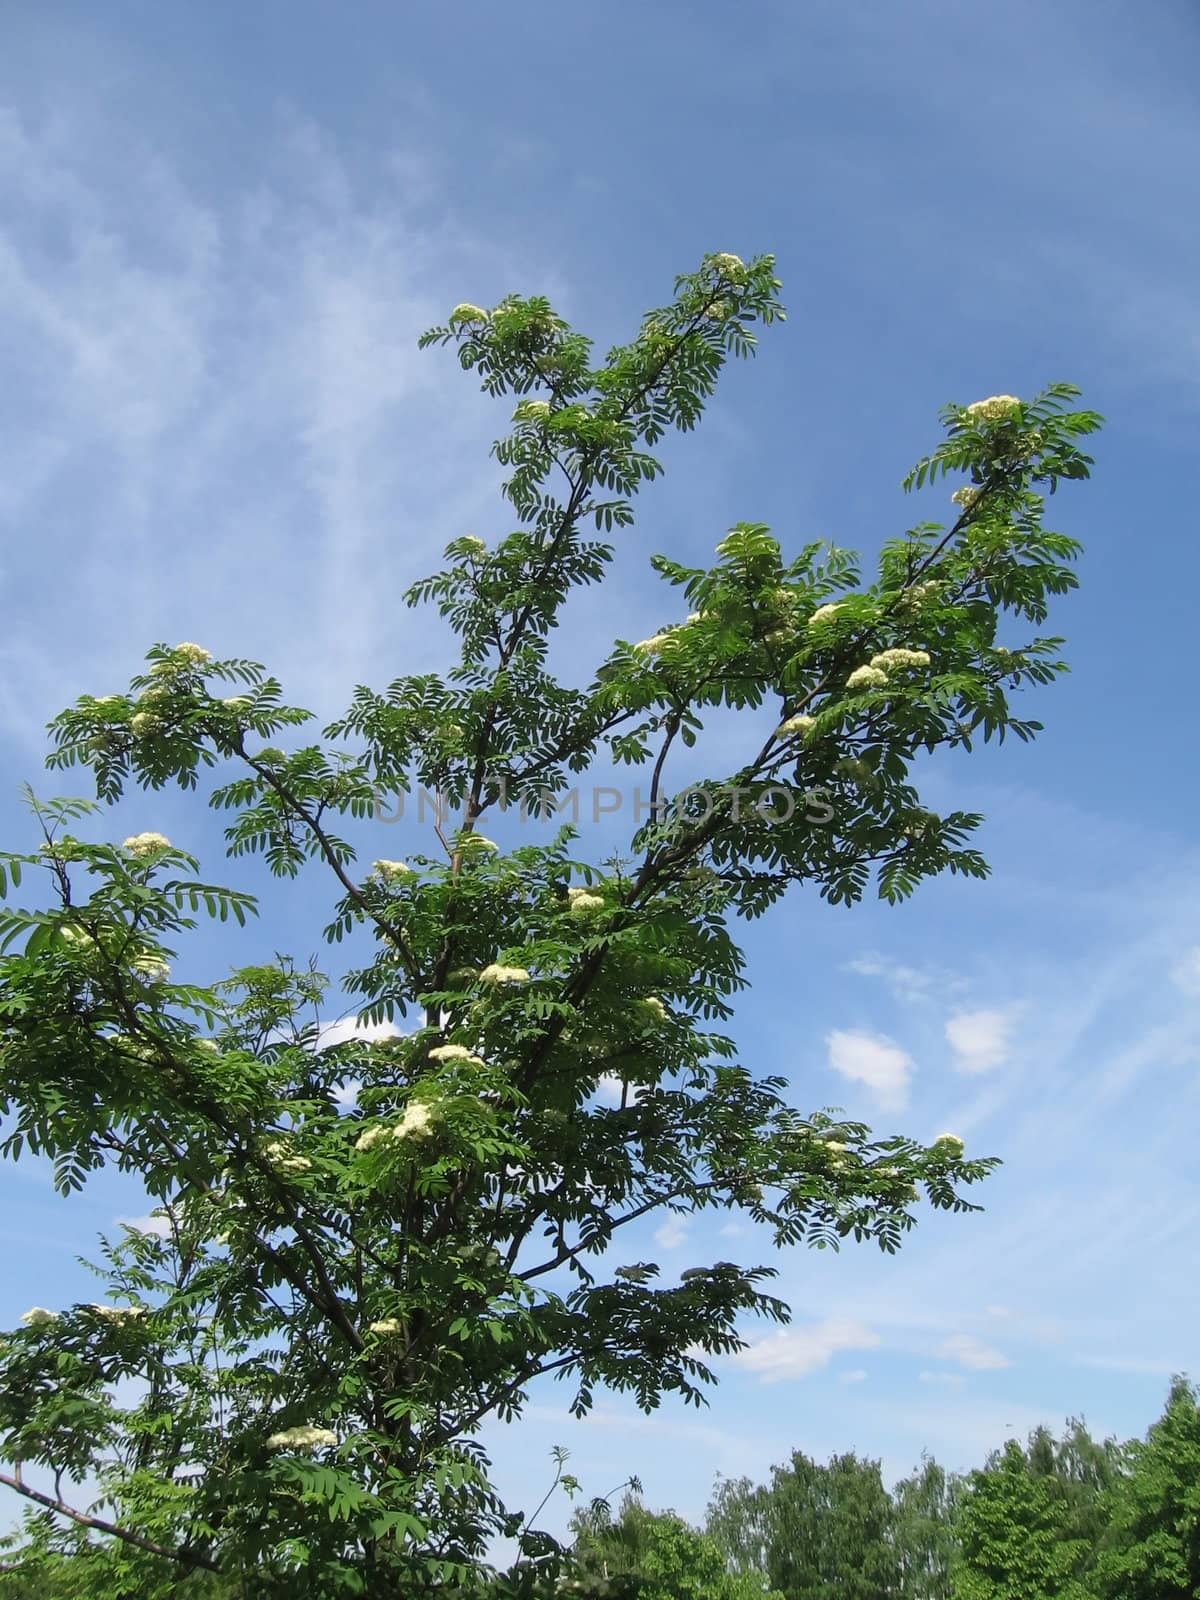 Blossoming mountain ash on a background of blue sky